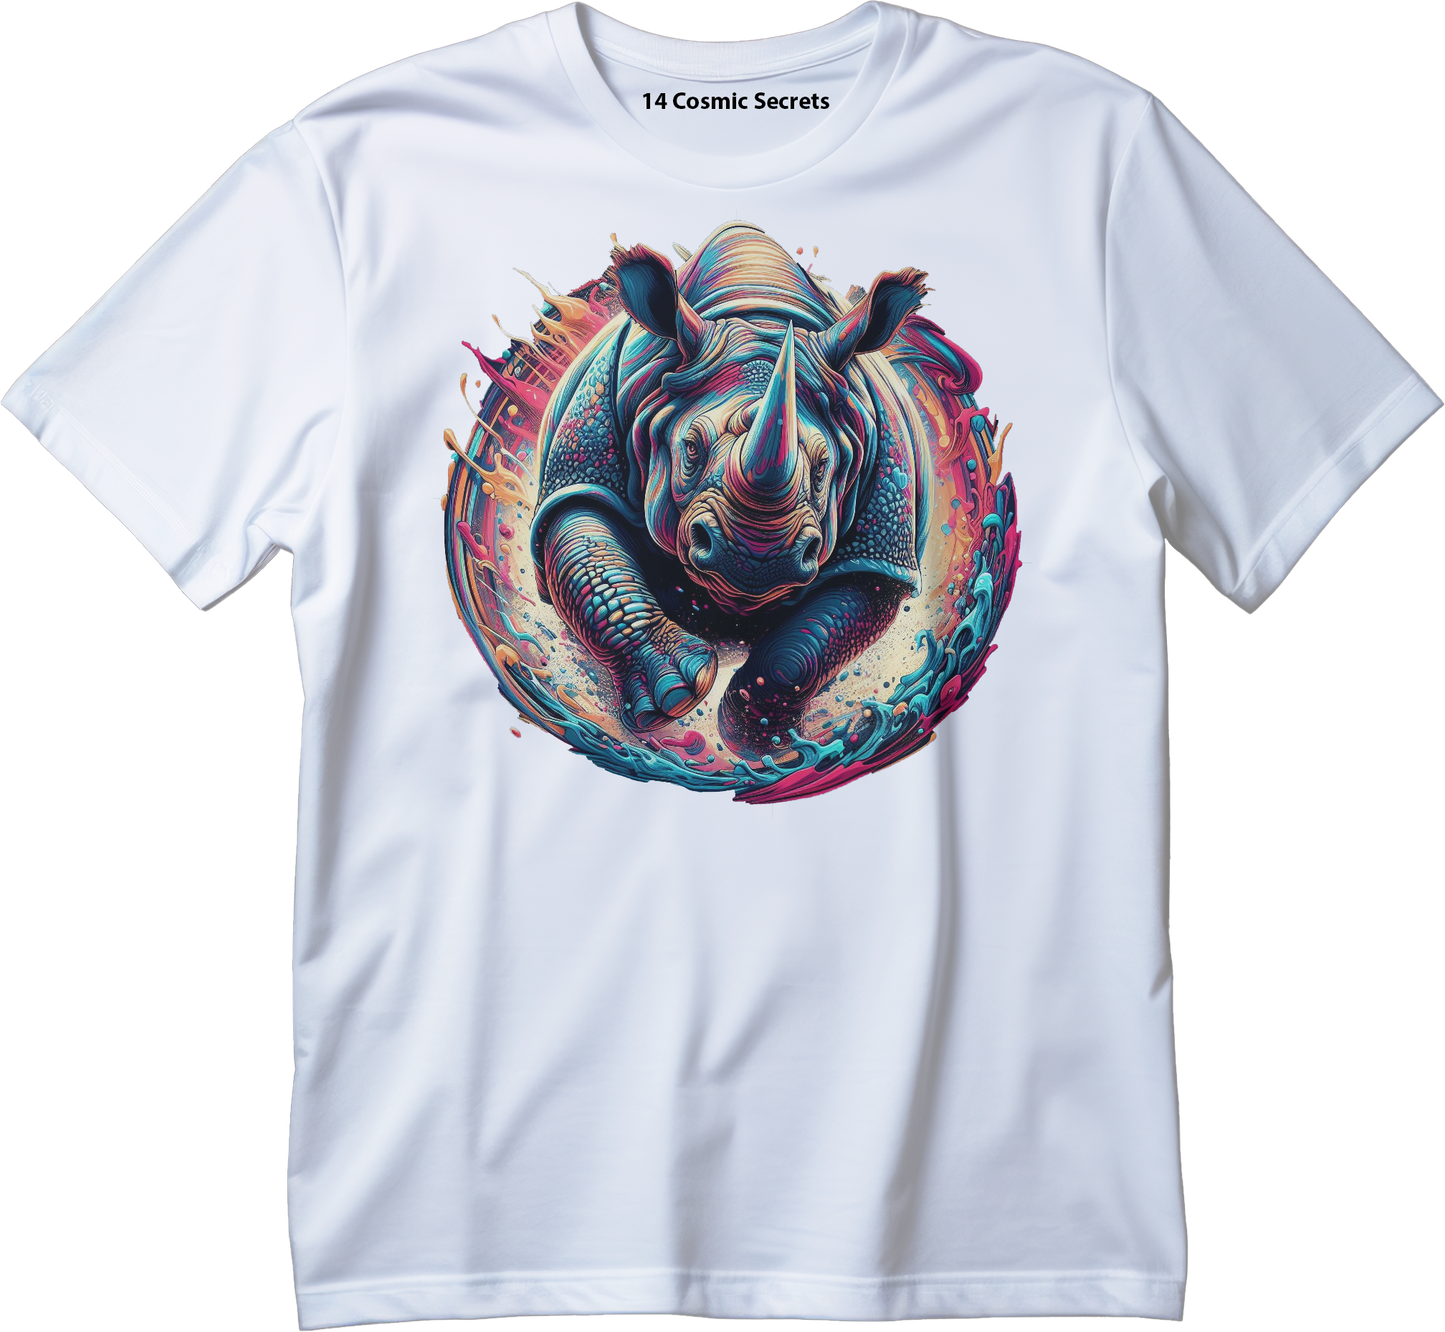 Majestic Indian Rhino Graphic Printed T-Shirt  Cotton T-Shirt Magnificence of India T-Shirt